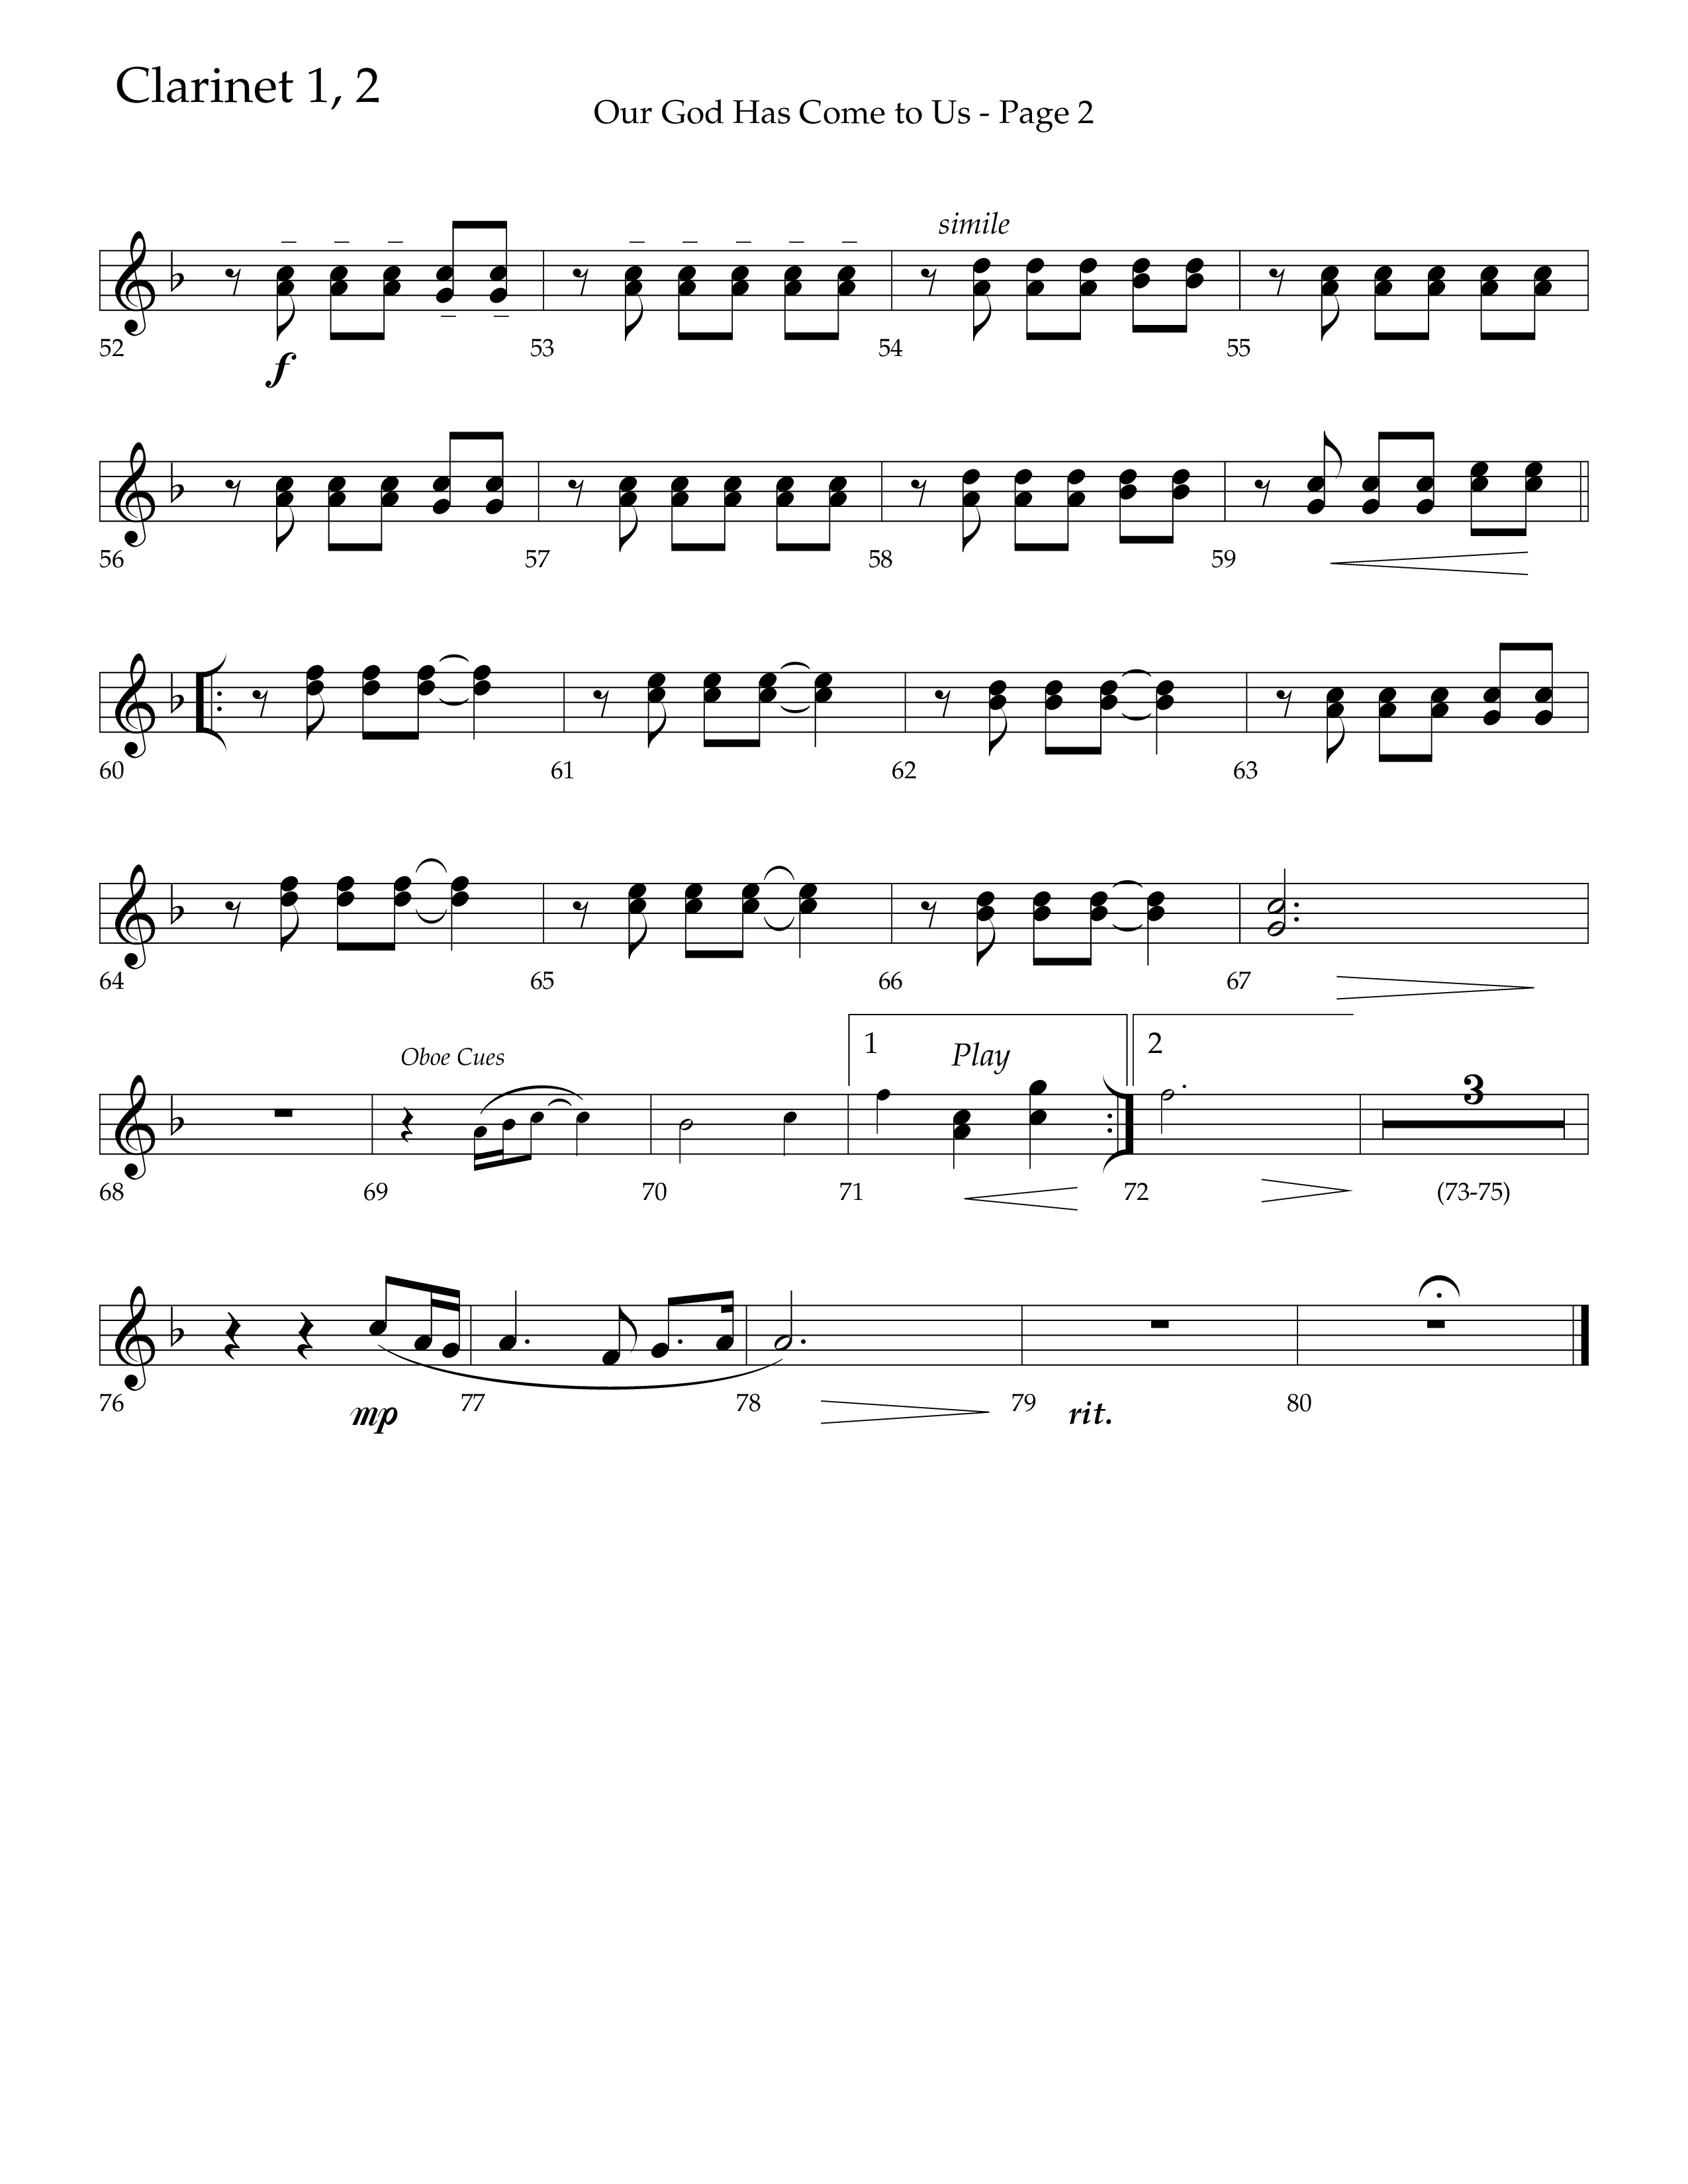 Our God Has Come To Us (Choral Anthem SATB) Clarinet 1/2 (Lifeway Choral / Arr. Camp Kirkland)